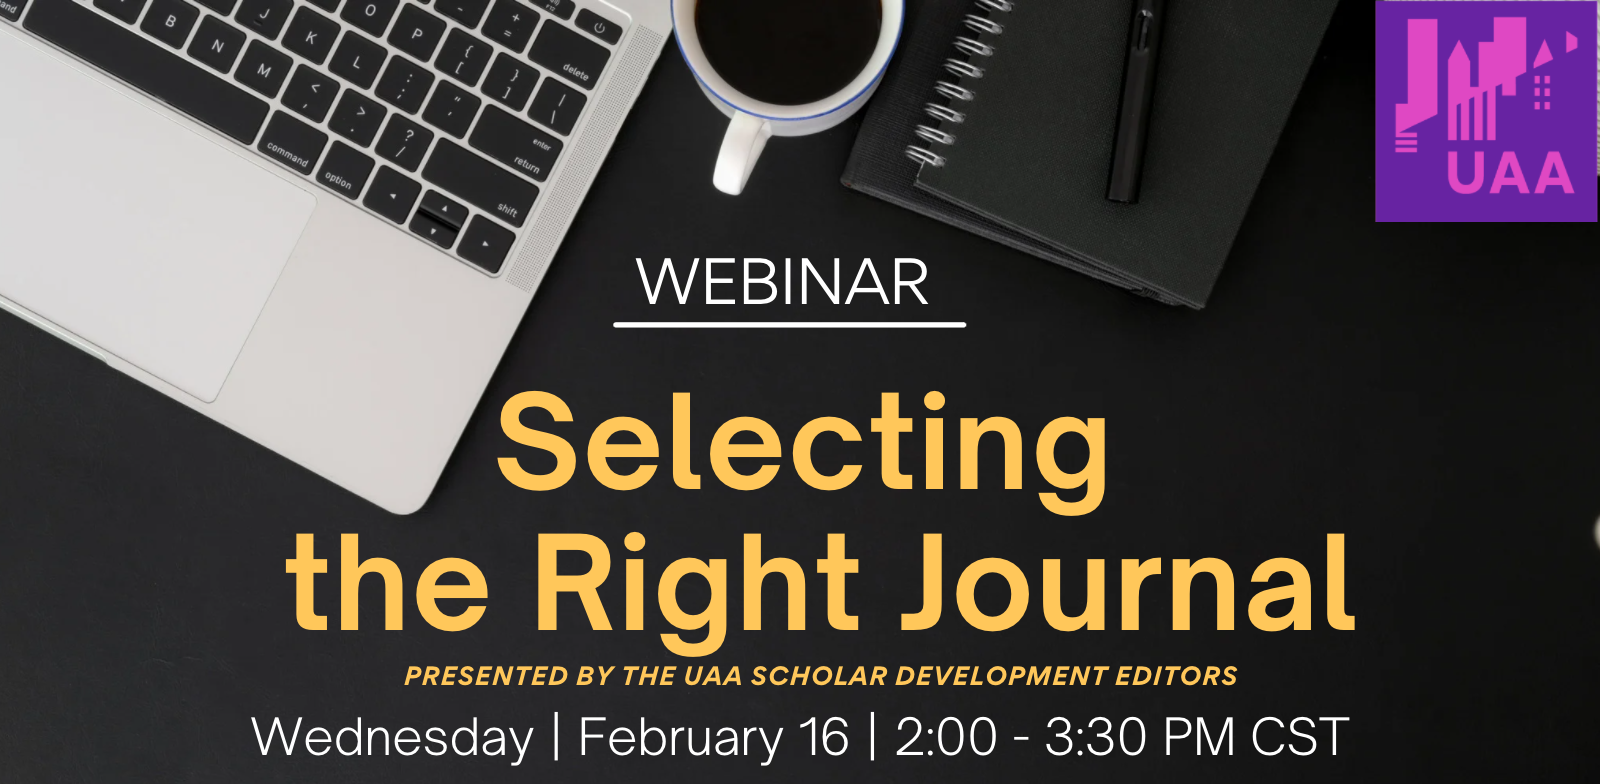 Uaa Webinar:  Selecting The Right Journal